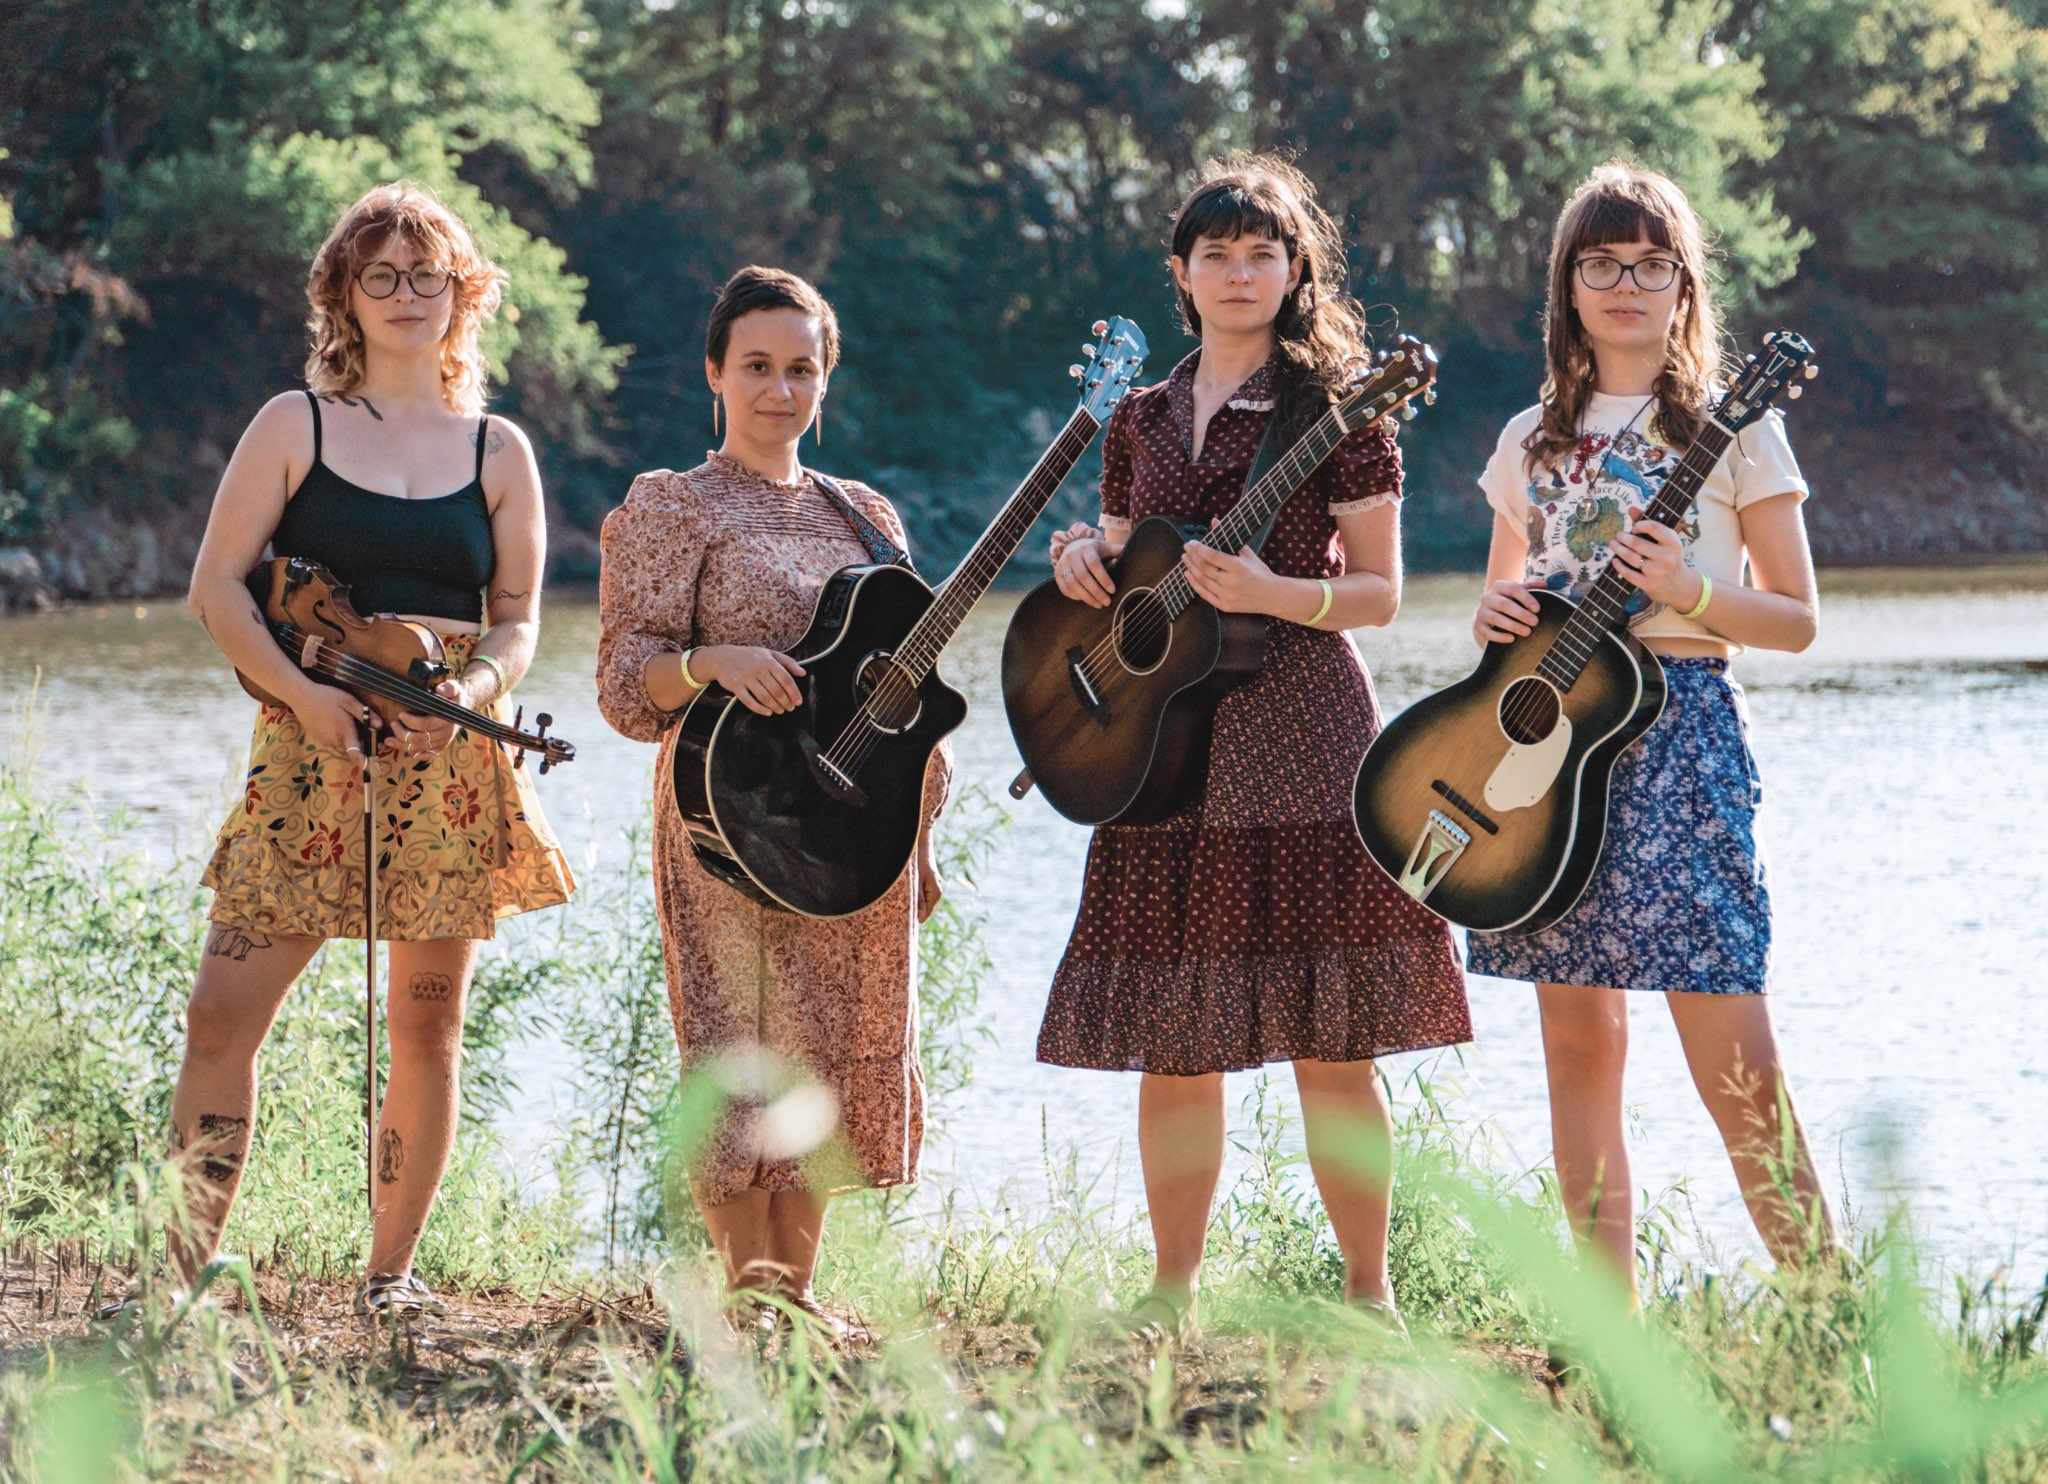 Four friends stand side by side with grass in the foreground and water in the background. From left to right: Gray, a person in a yellow, floral-patterned skirt and black tank top with black glasses and tattoos, holds a fiddle; Siena, a person with short, dark brown hair, pointy dangling earrings, and a mauve patterned long dress, holds a black guitar; Emily, a woman with long brown hair with straight-across bangs and a patterned burgundy dress holds a dark brown guitar; and Lauren, a woman with mid-length brown hair with straight-across bangs and black glasses, wearing an indigo skort and beige cropped t-shirt, holds a vintage sunburst guitar.